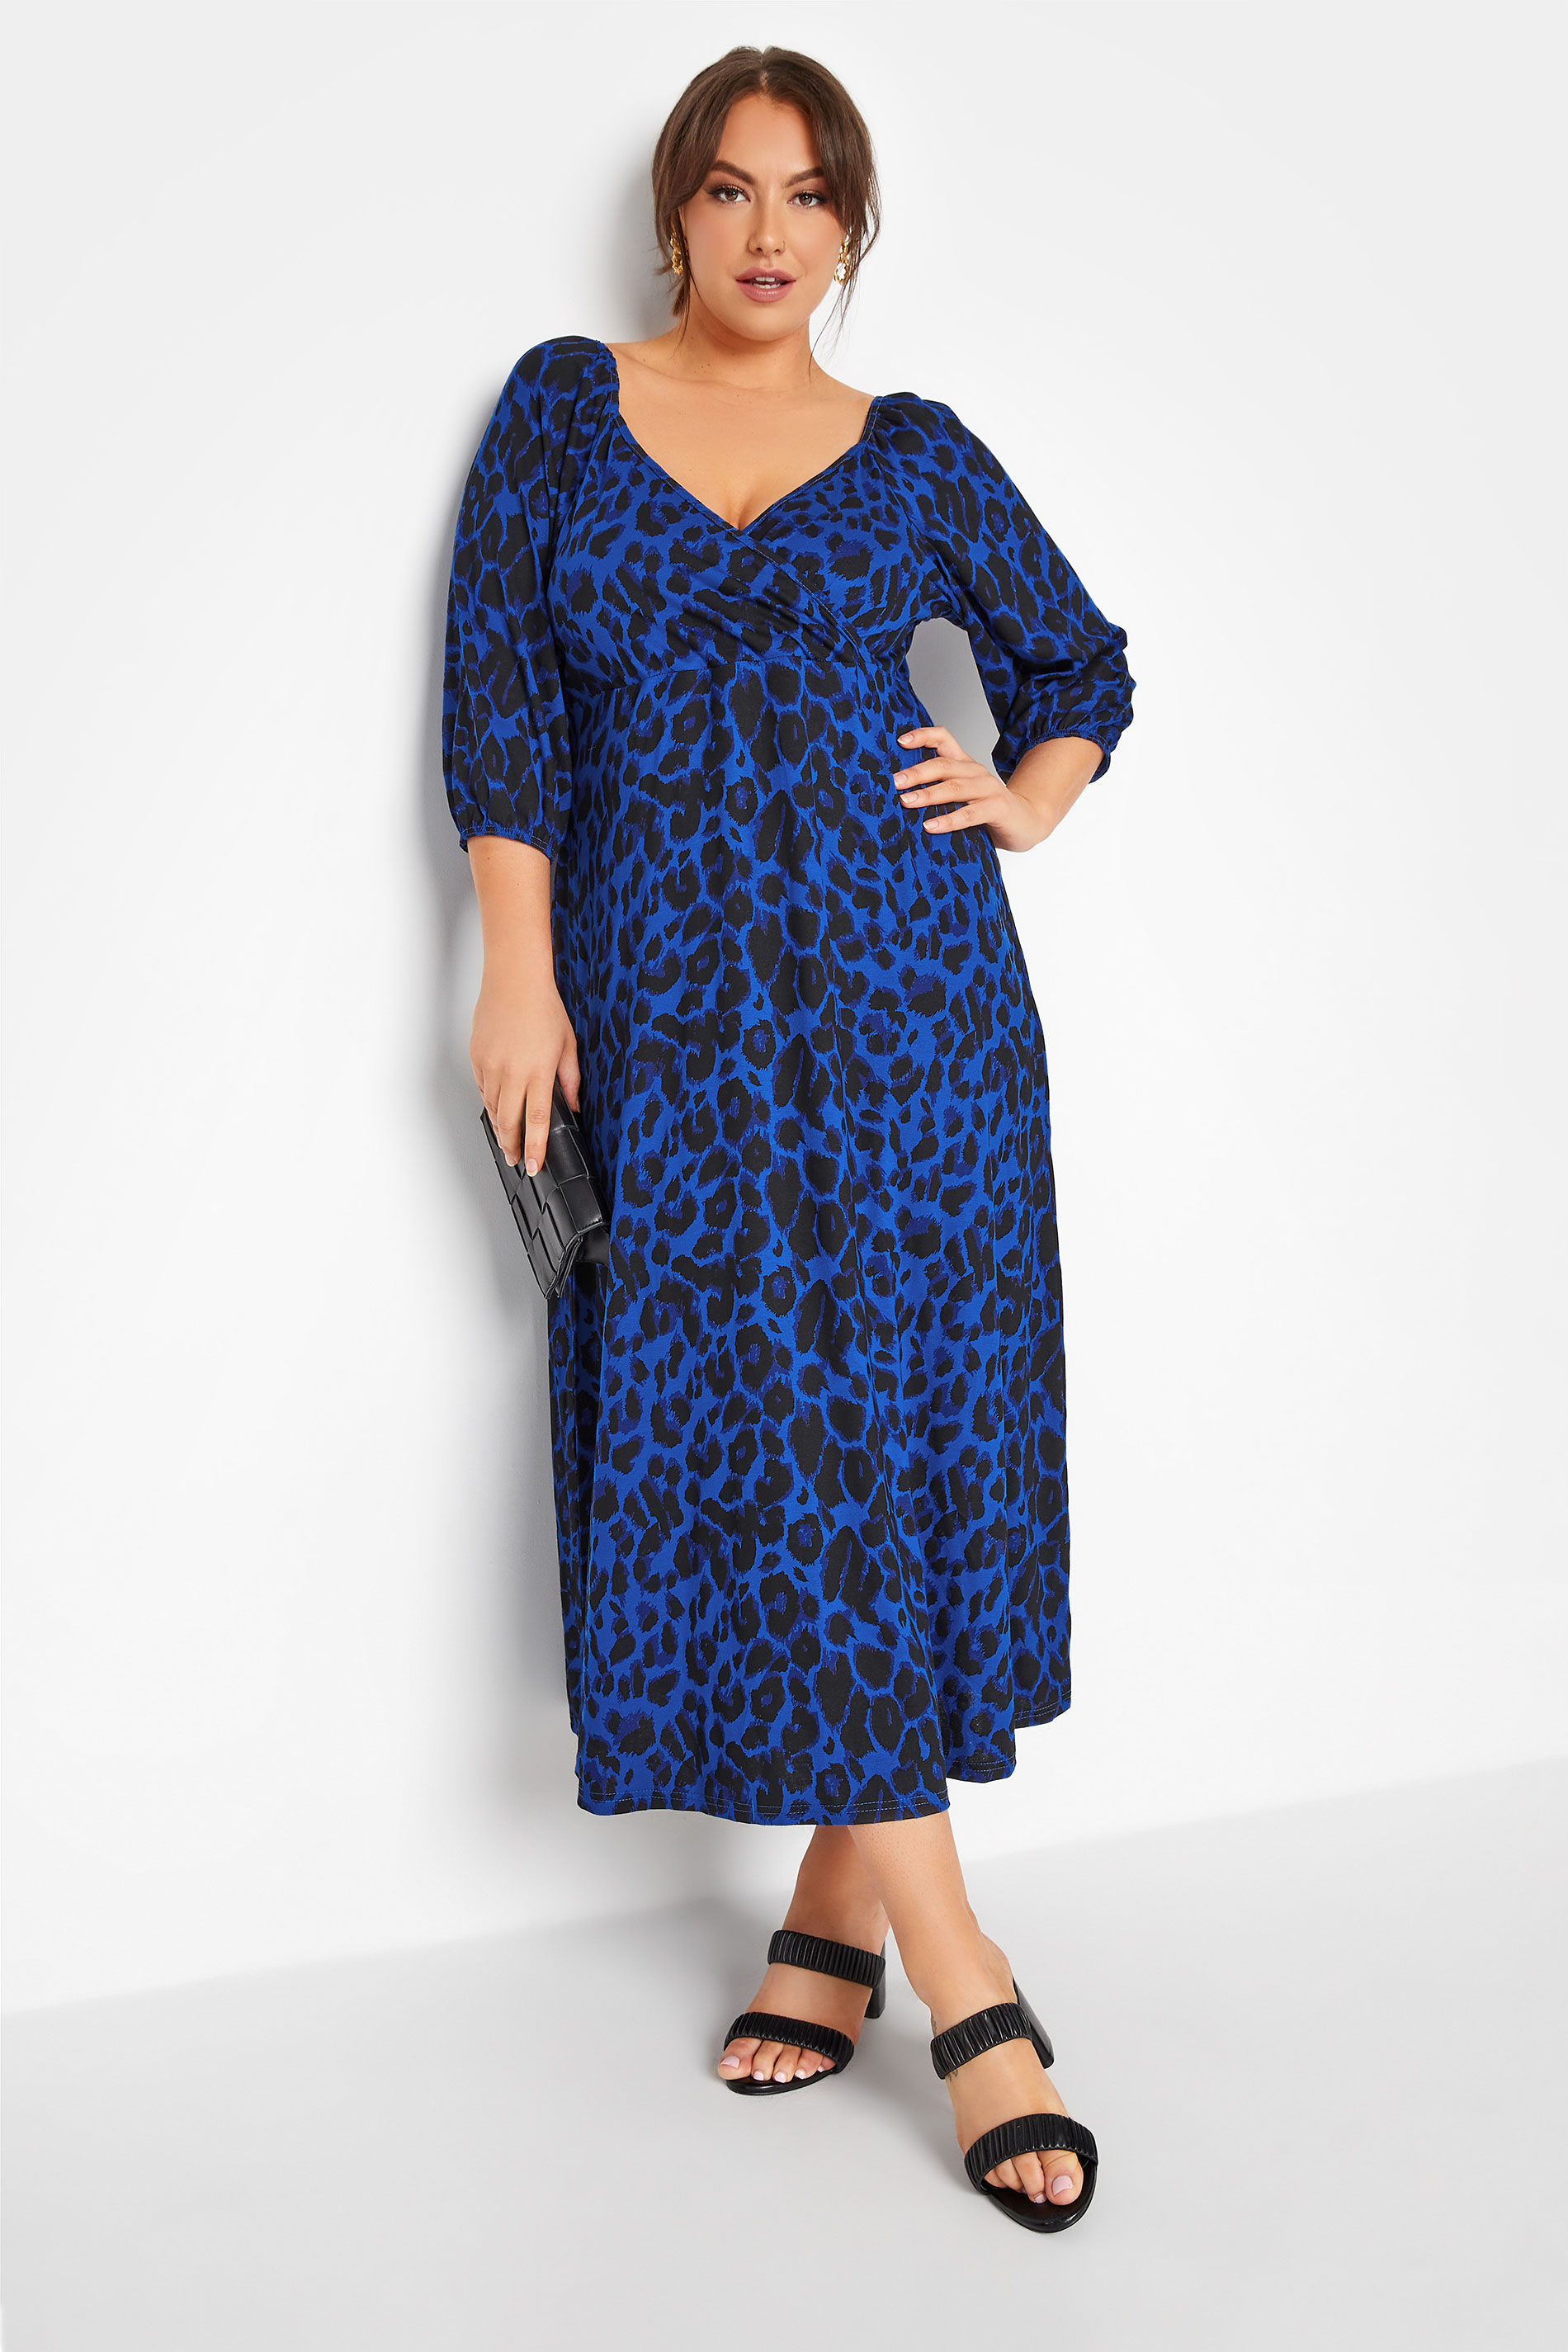 LIMITED COLLECTION Curve Navy Blue Leopard Print Wrap Milkmaid Dress 1